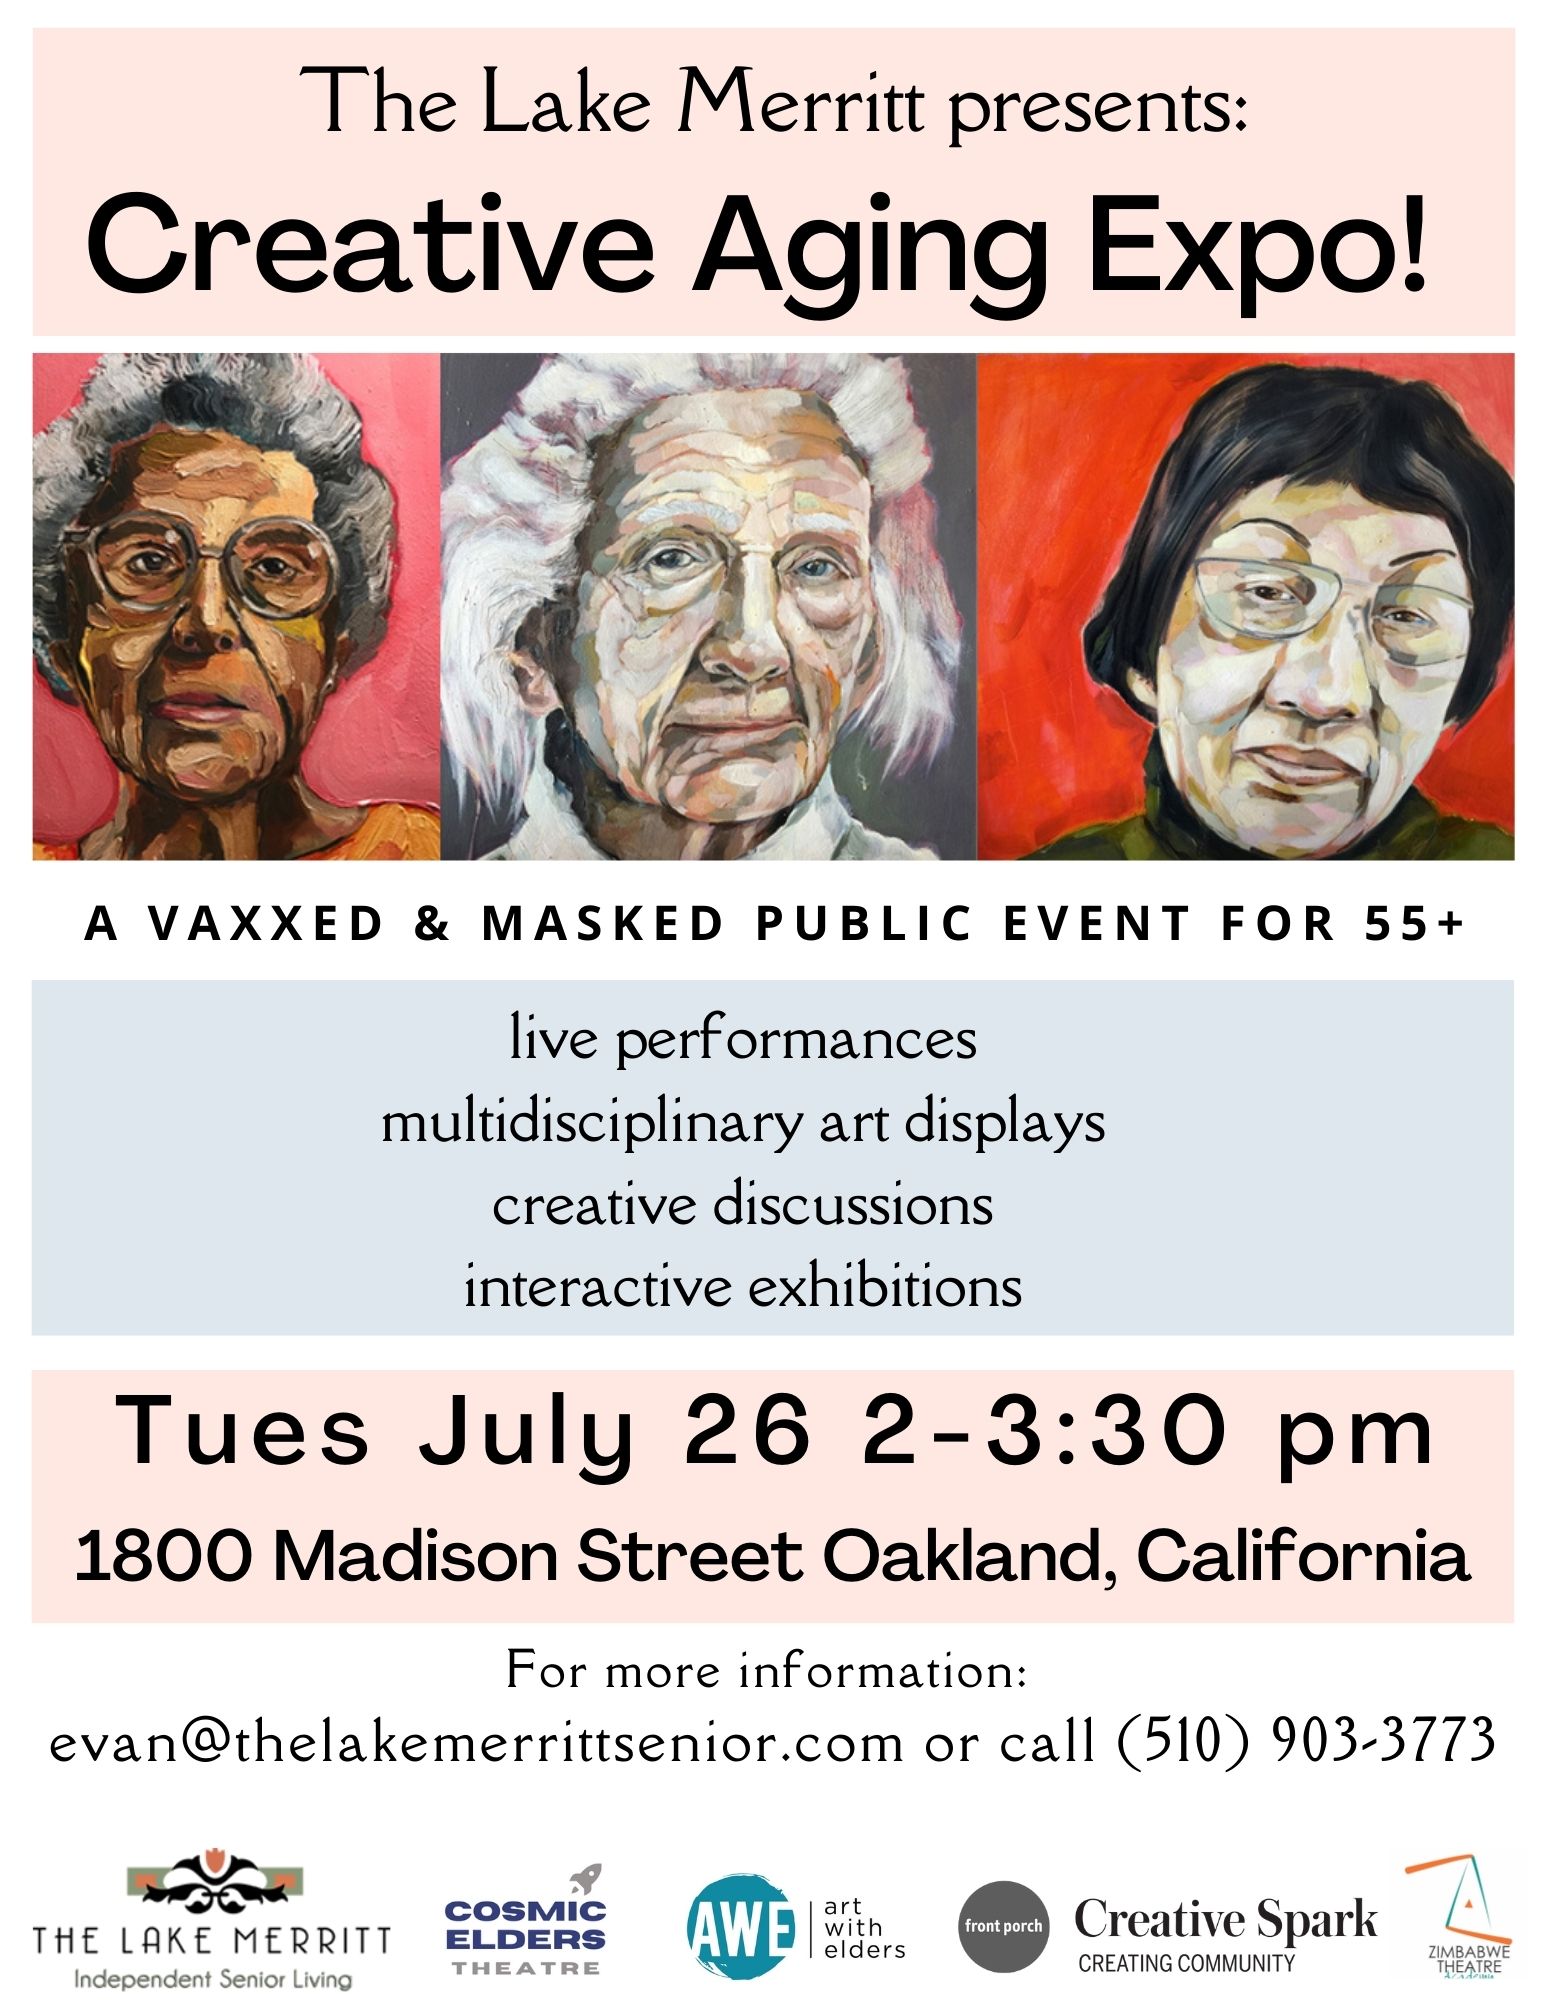 The Creative Aging Expo